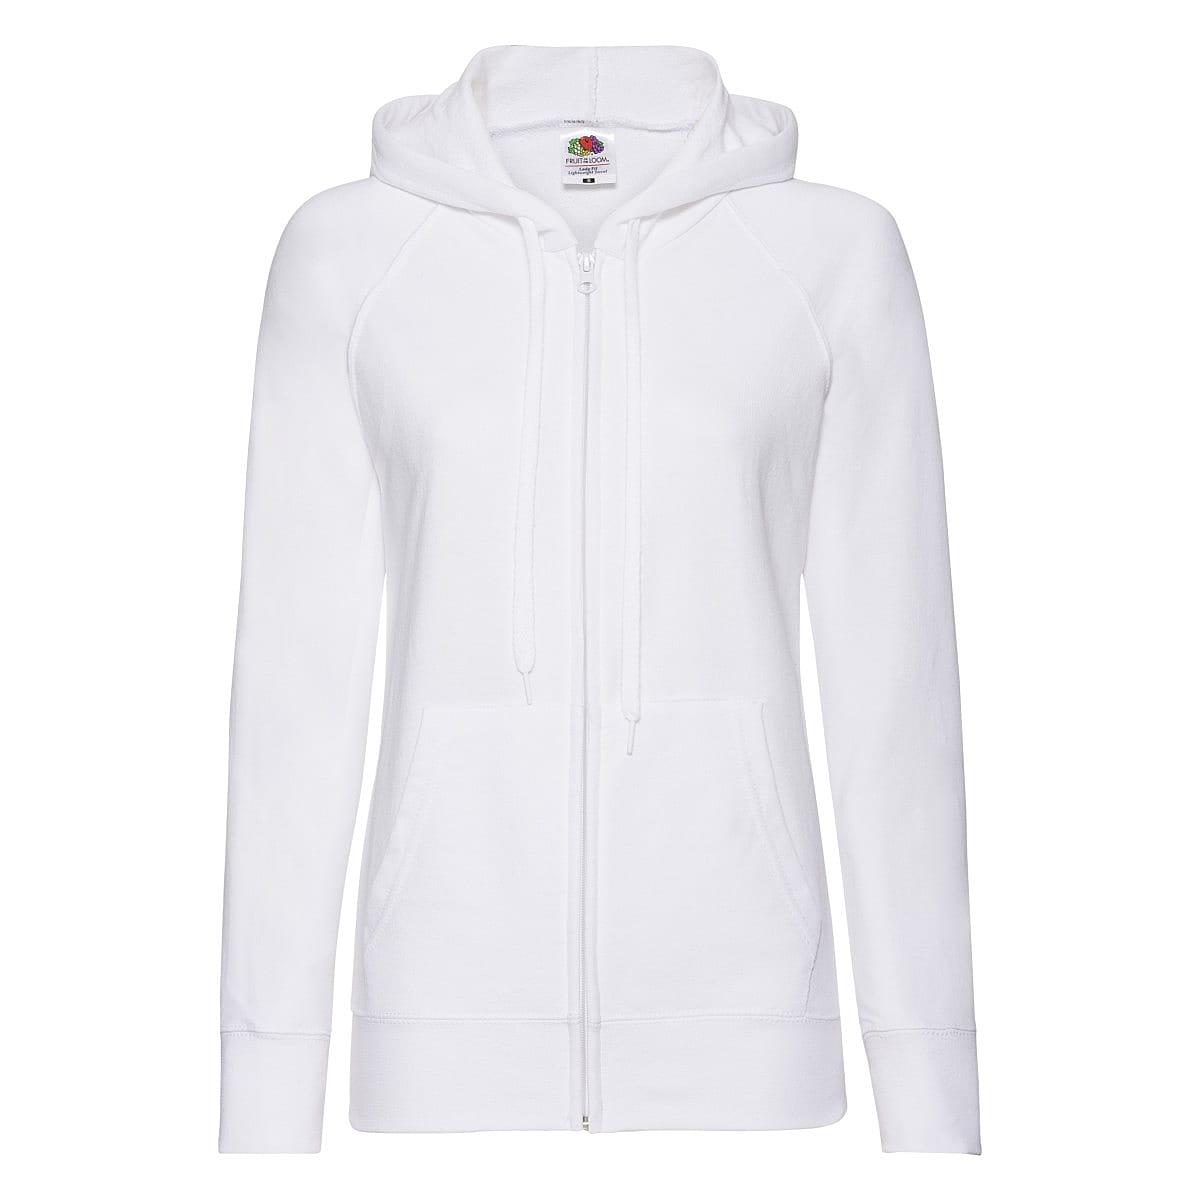 Fruit Of The Loom Lady-Fit Lightweight Full-Zip Hoodie in White (Product Code: 62150)